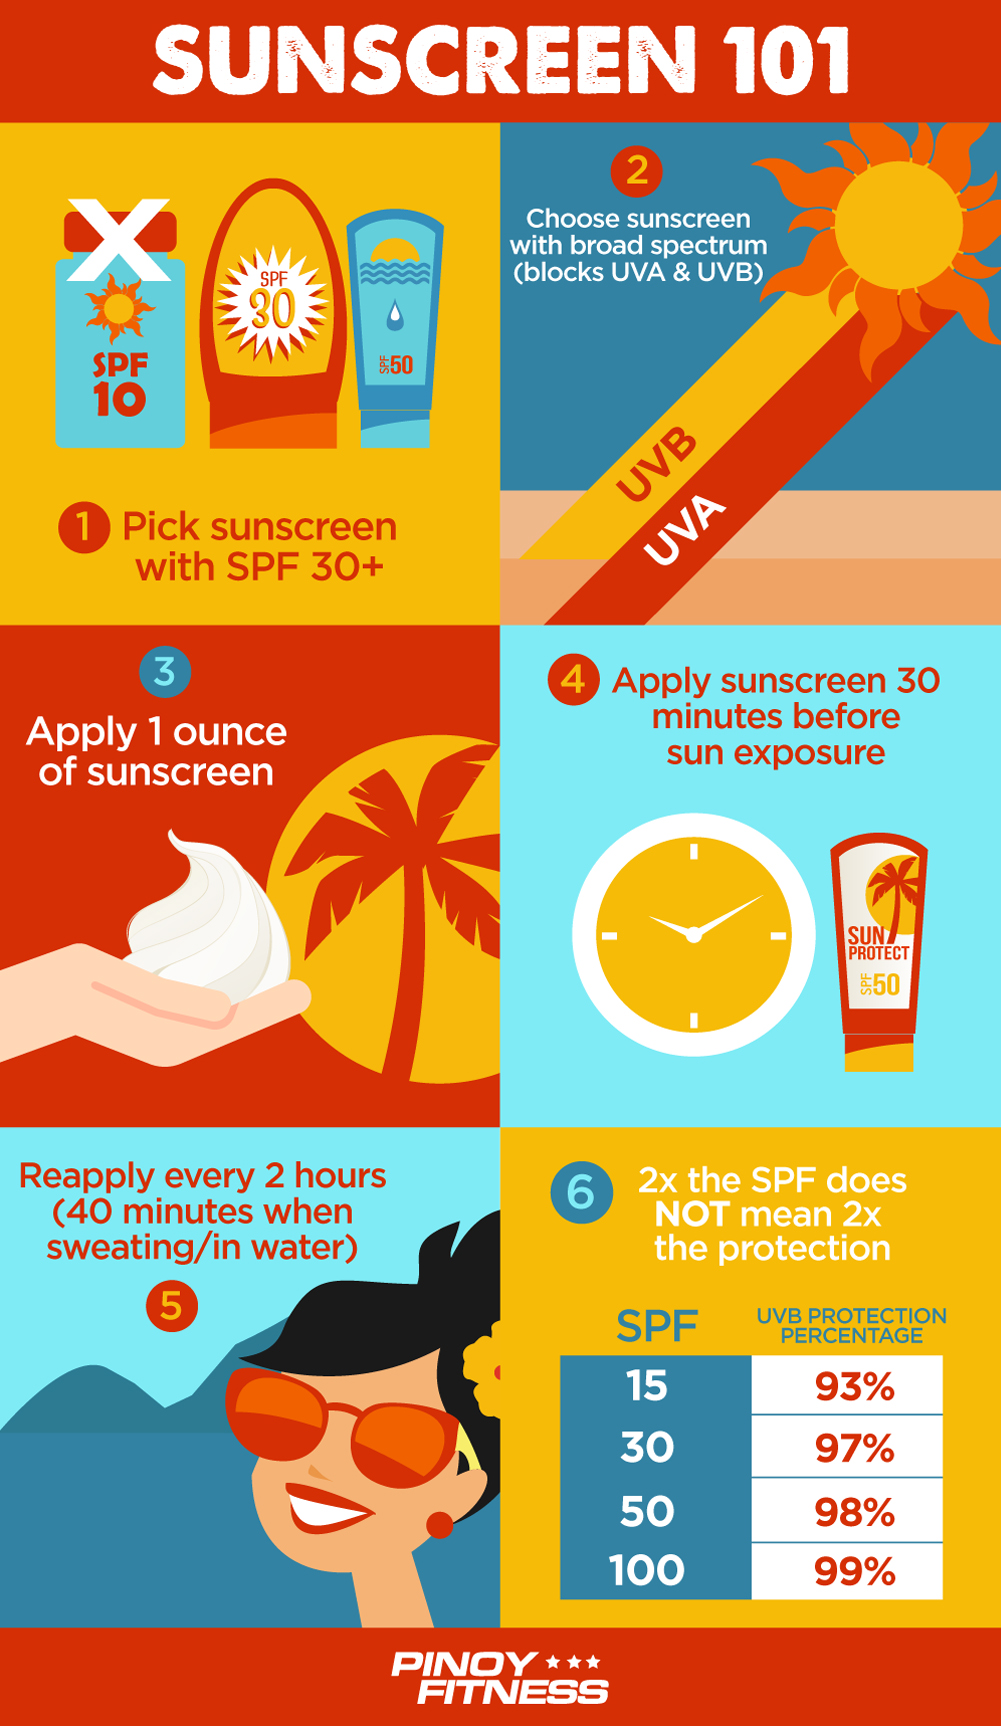 SUNSCREEN 101: 6 Tips You Should Know this Summer | Pinoy Fitness